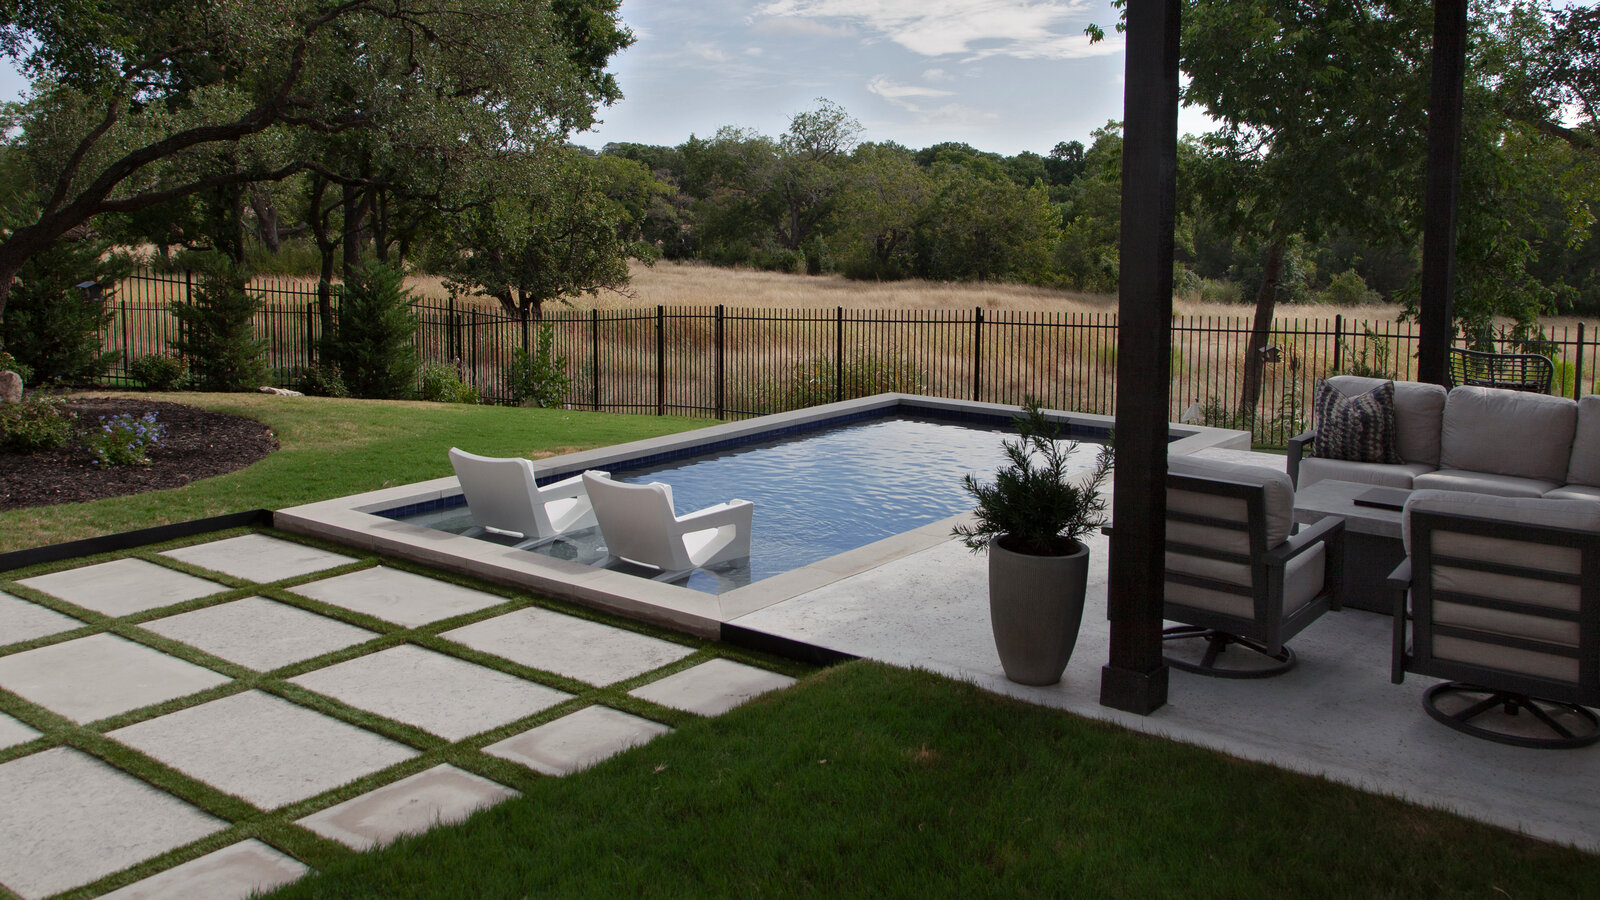 The Little Pool Co. - Instant Pools, Timeless Lifestyle | Pools for Smaller Backyards